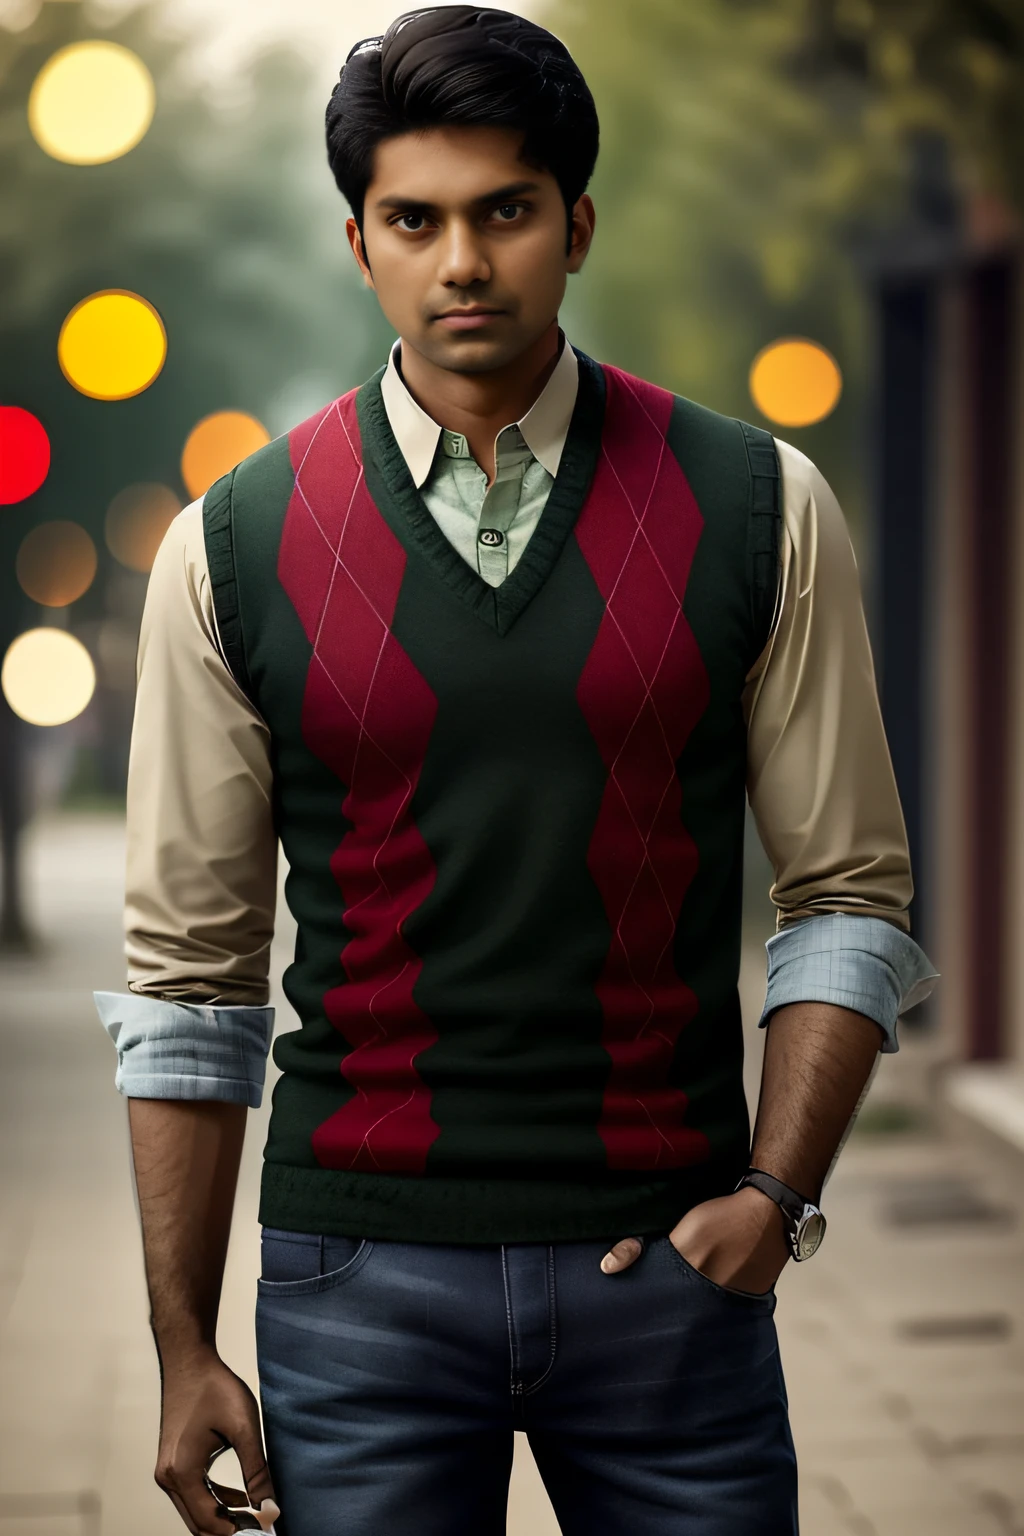 photo of an Indian man, wearing a red argyle vest, green collared shirt, and black jeans,  bokeh, outdoor background, masterpiece, high quality, photorealistic, fashion